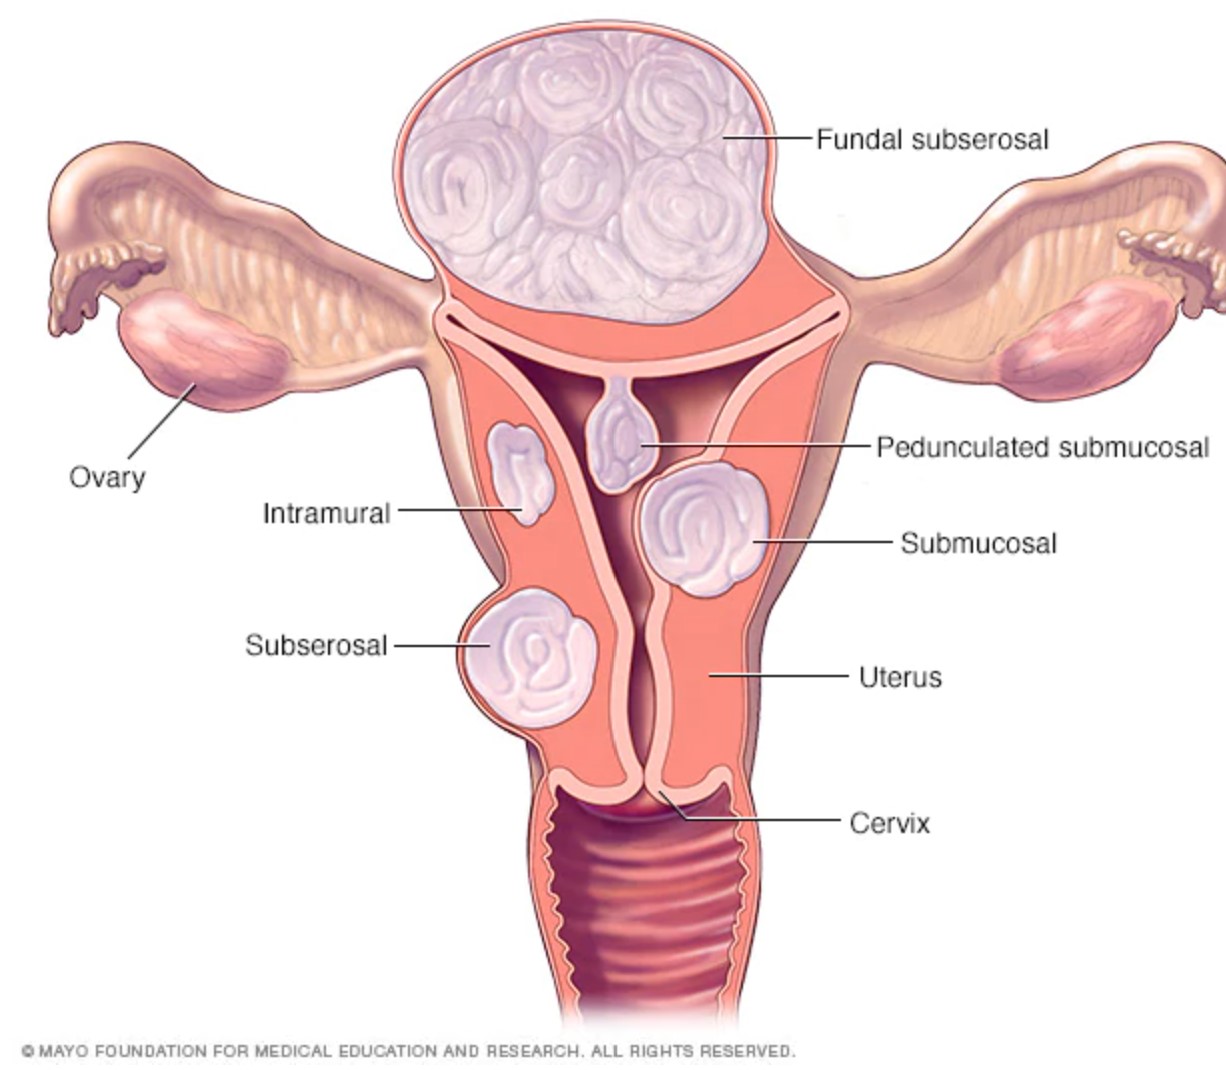 Diagram of the different types and location of uterine fibroids